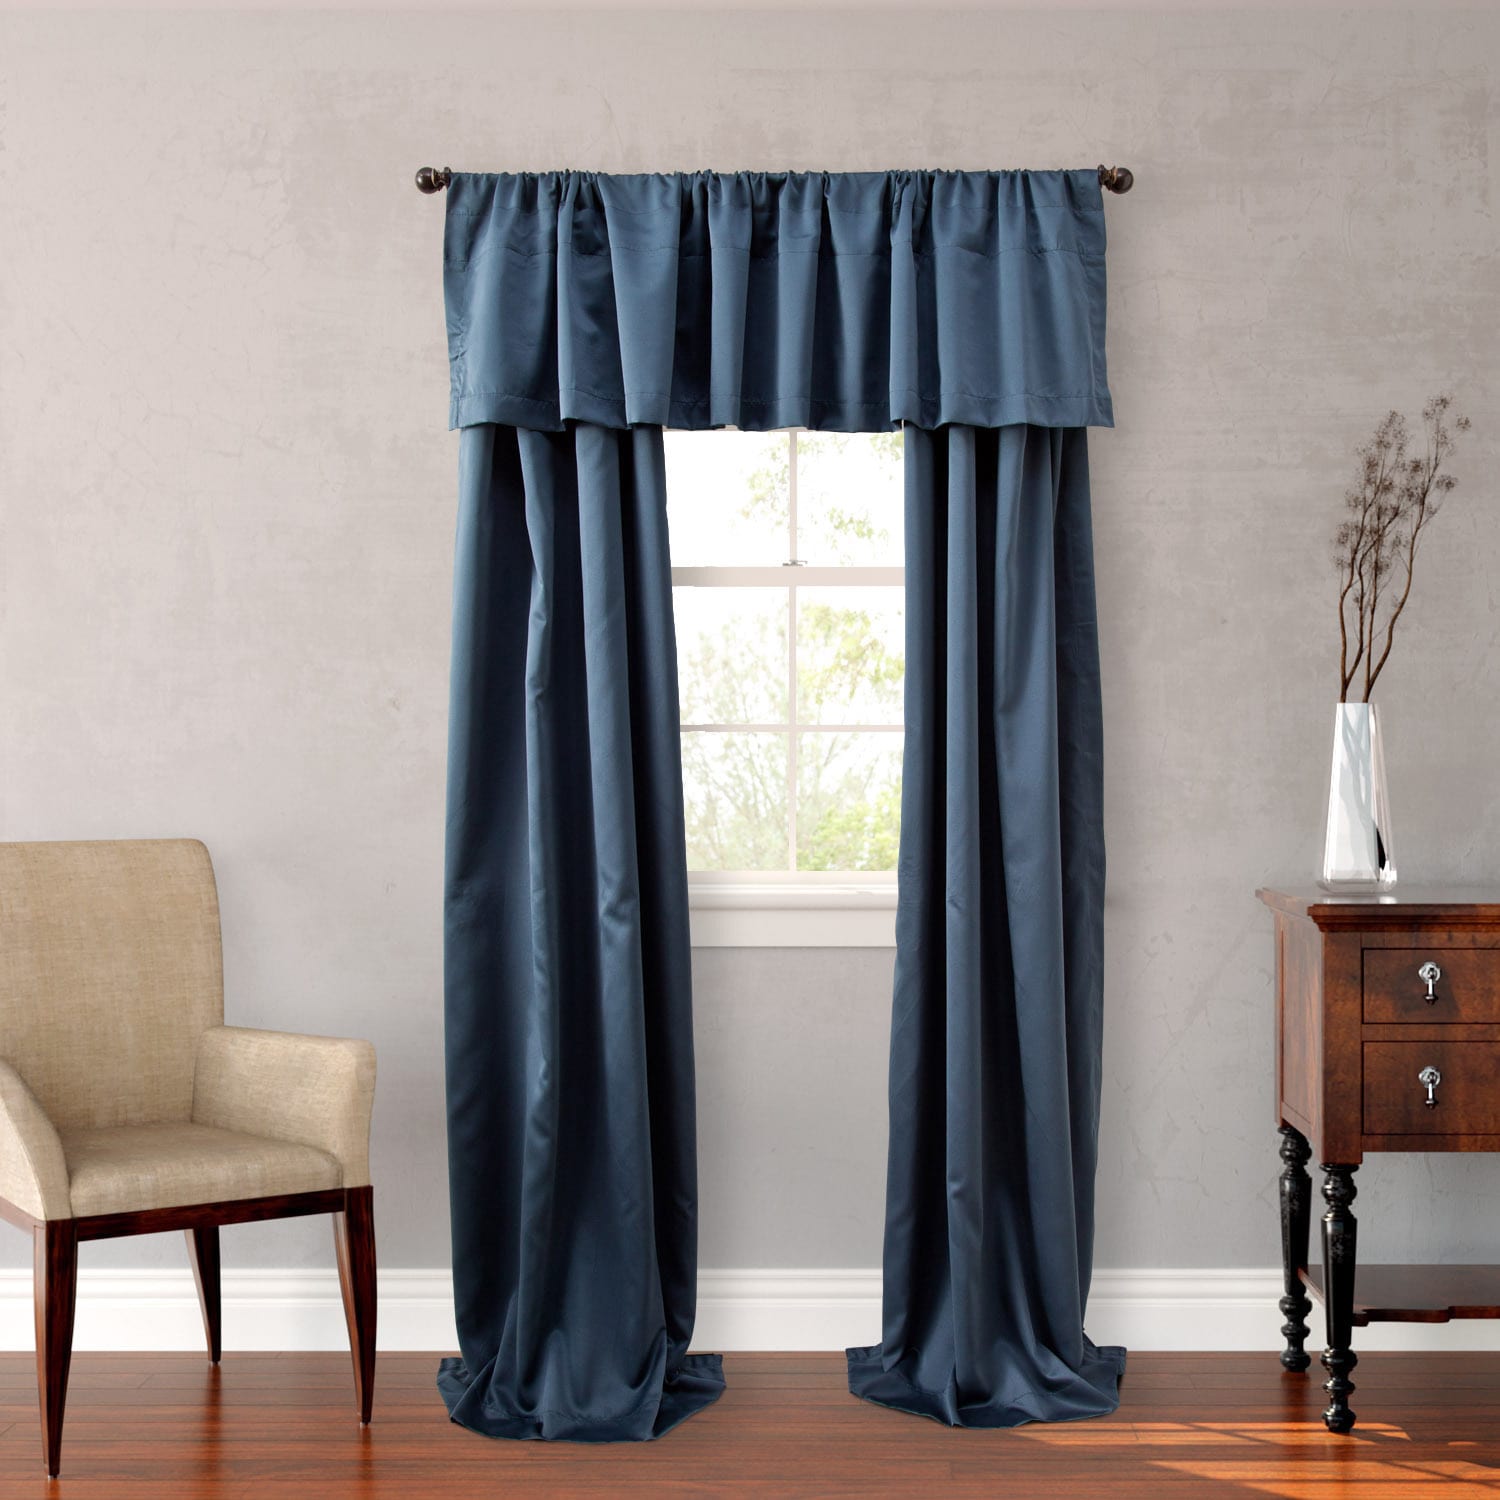 Nicole Miller Blue Polyester 84 inch Midnight Floral 4 piece Lined Curtain Panel Pair